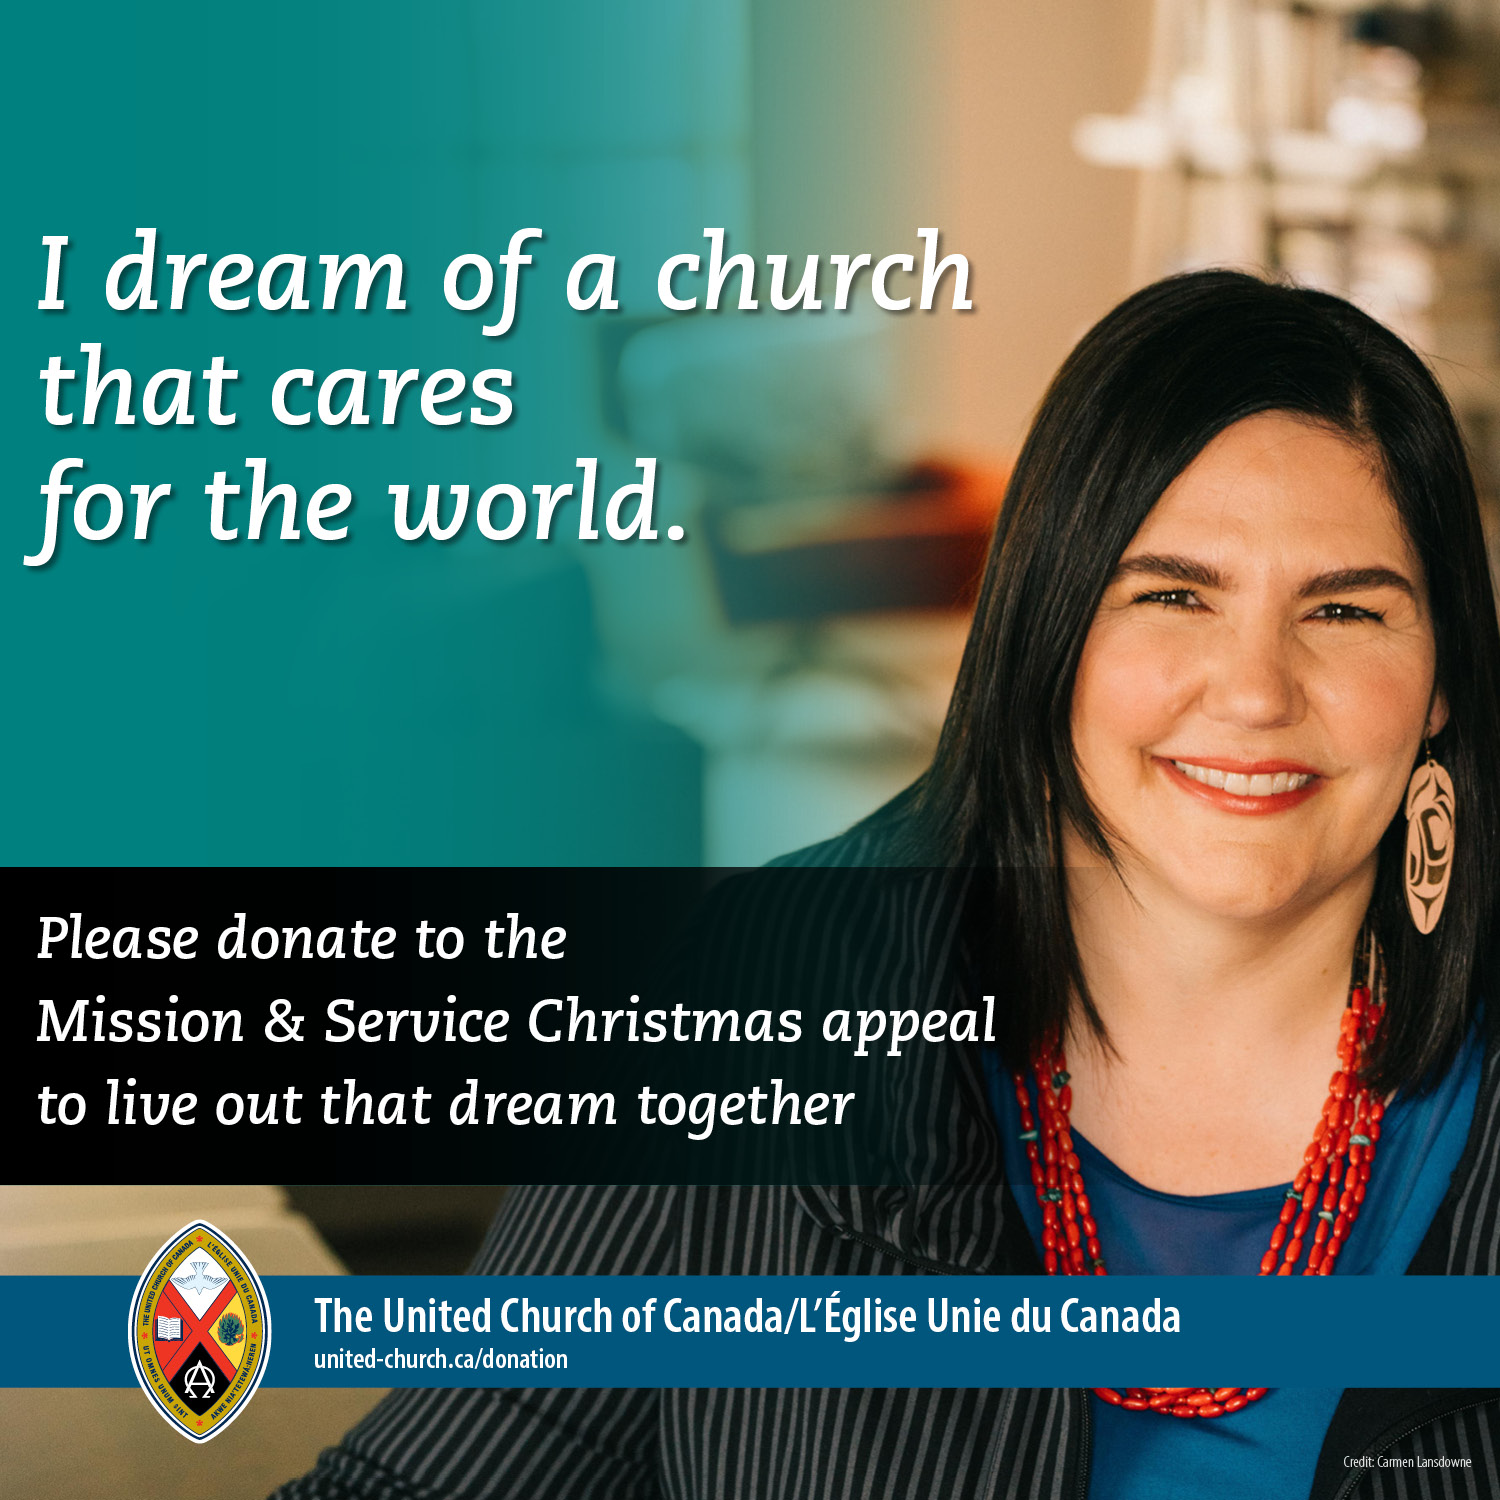 Portrait of Moderator Carmen Lansdowne beside the words "I dream of a church that cares for the world" and "Please donate to the Mission & Service Christmas appeal to live out that dream together."